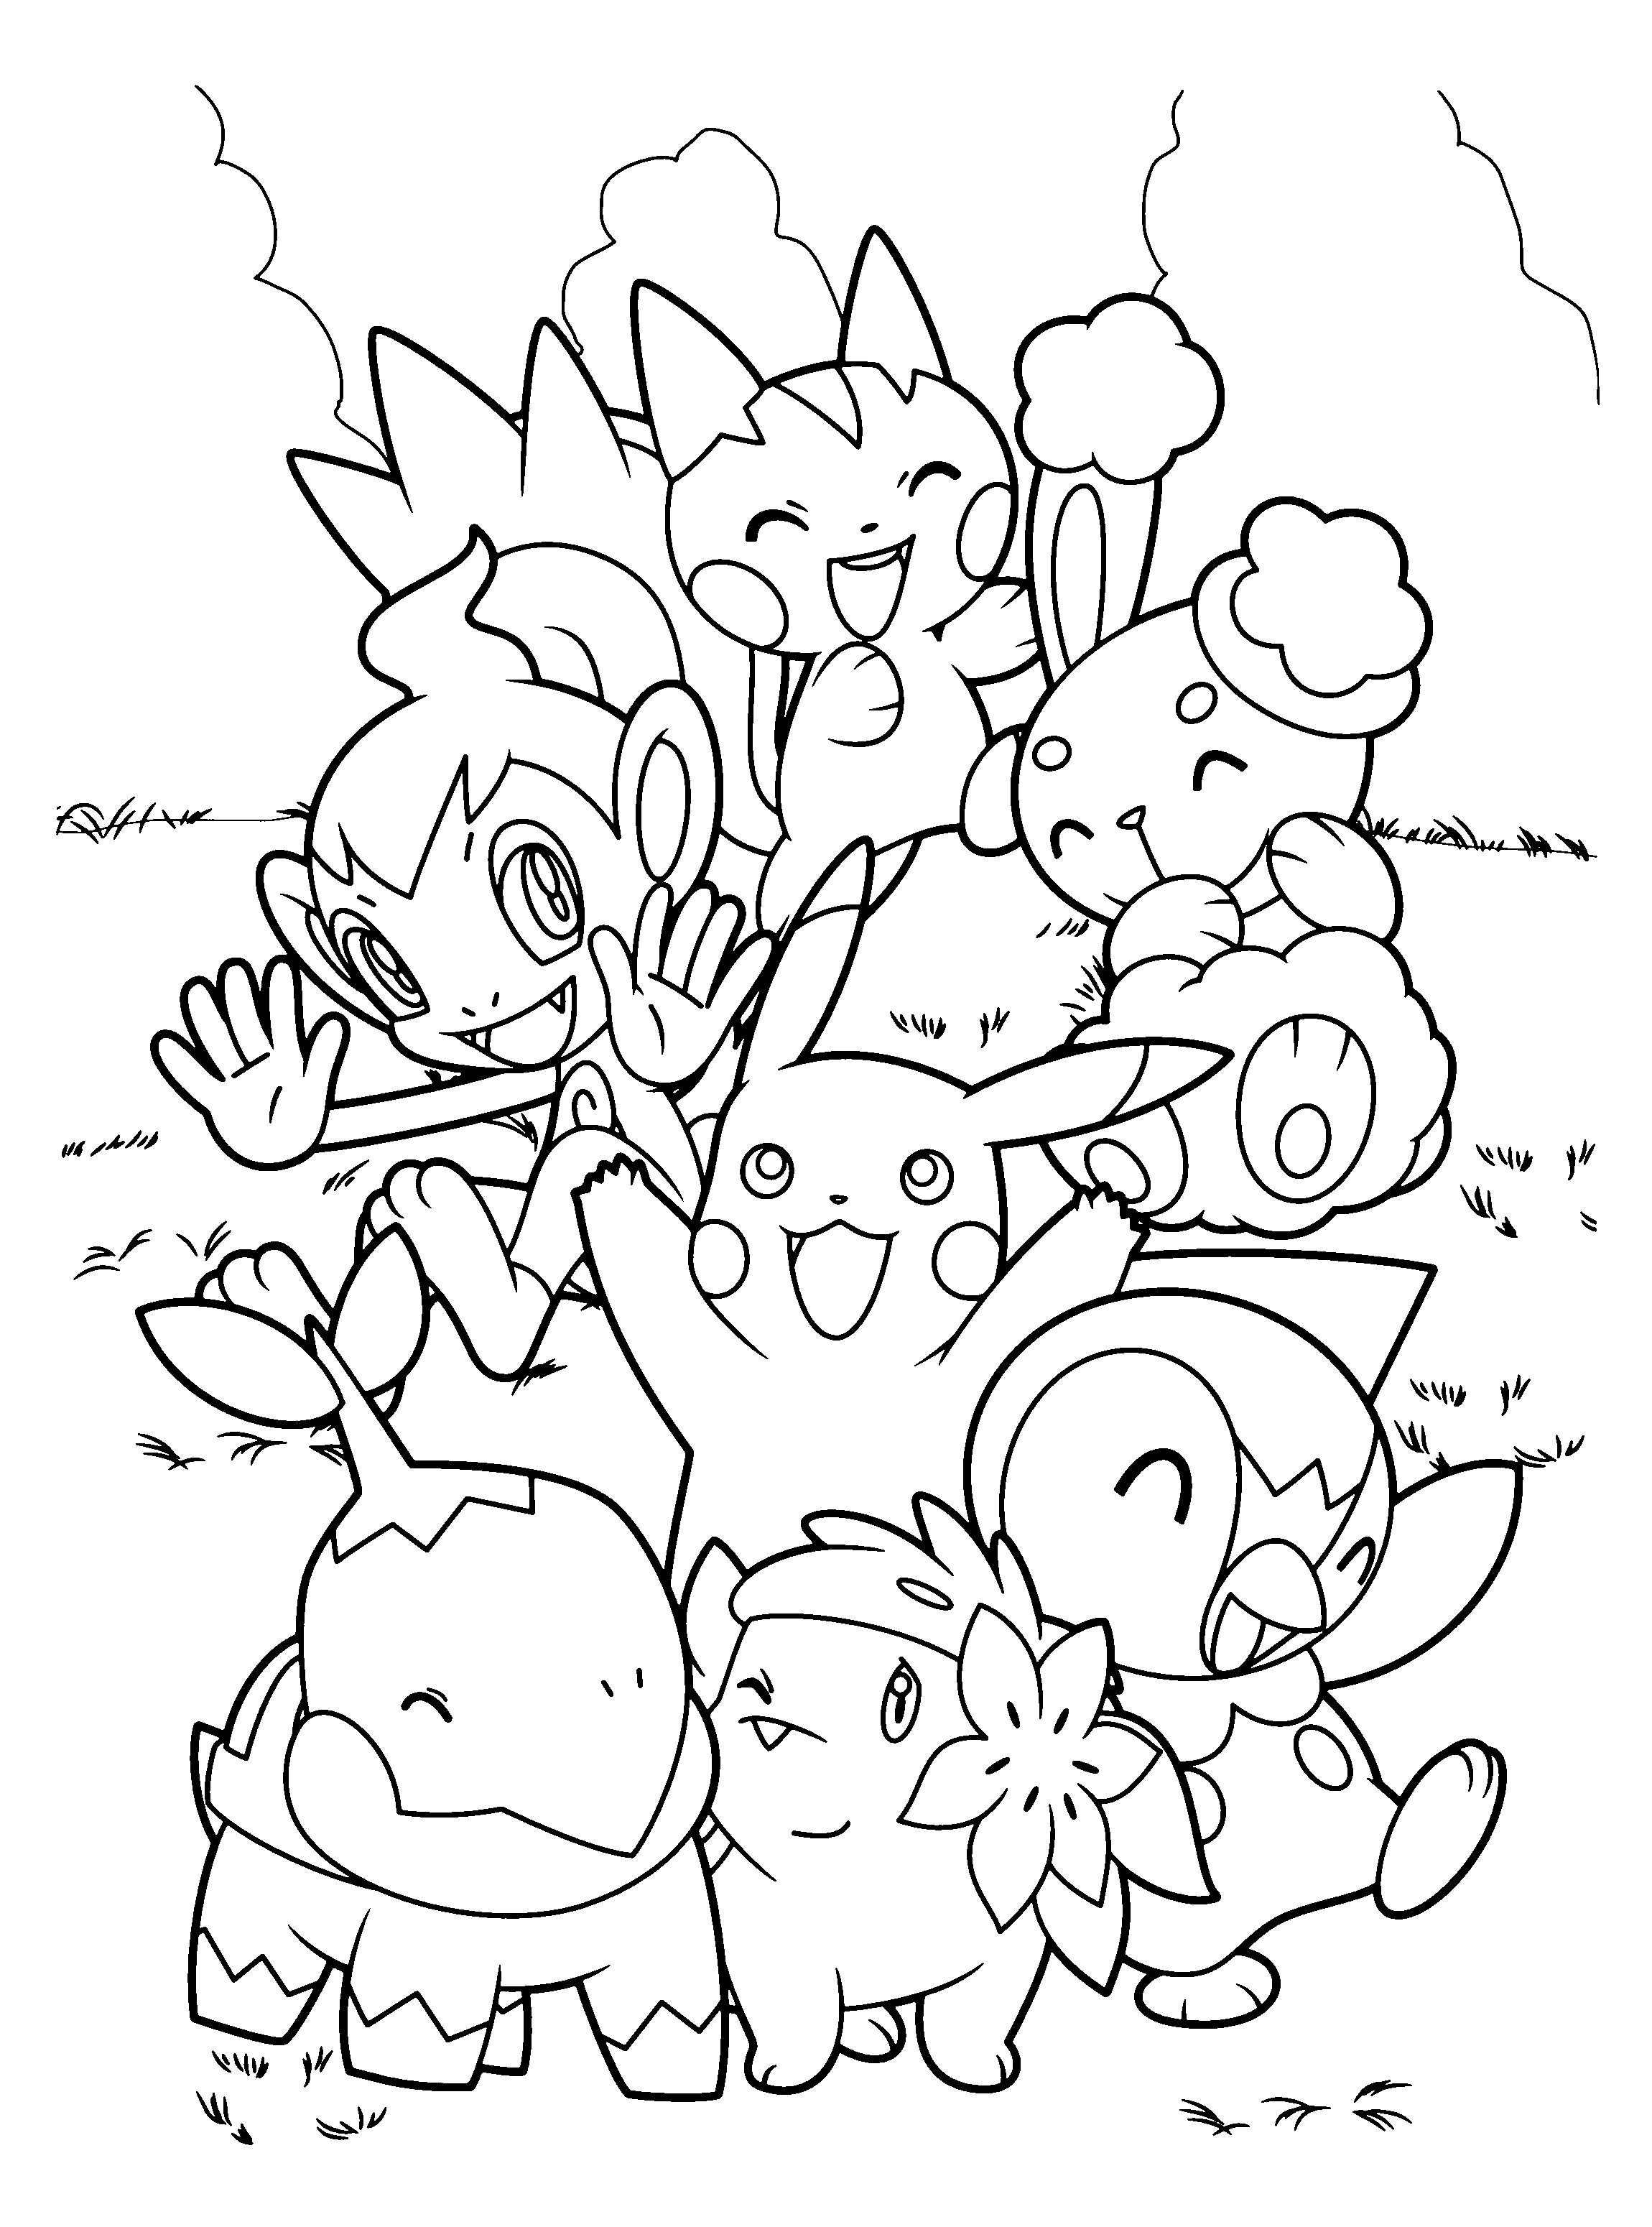 Coloring page: Pokemon Go (Video Games) #154134 - Printable coloring pages